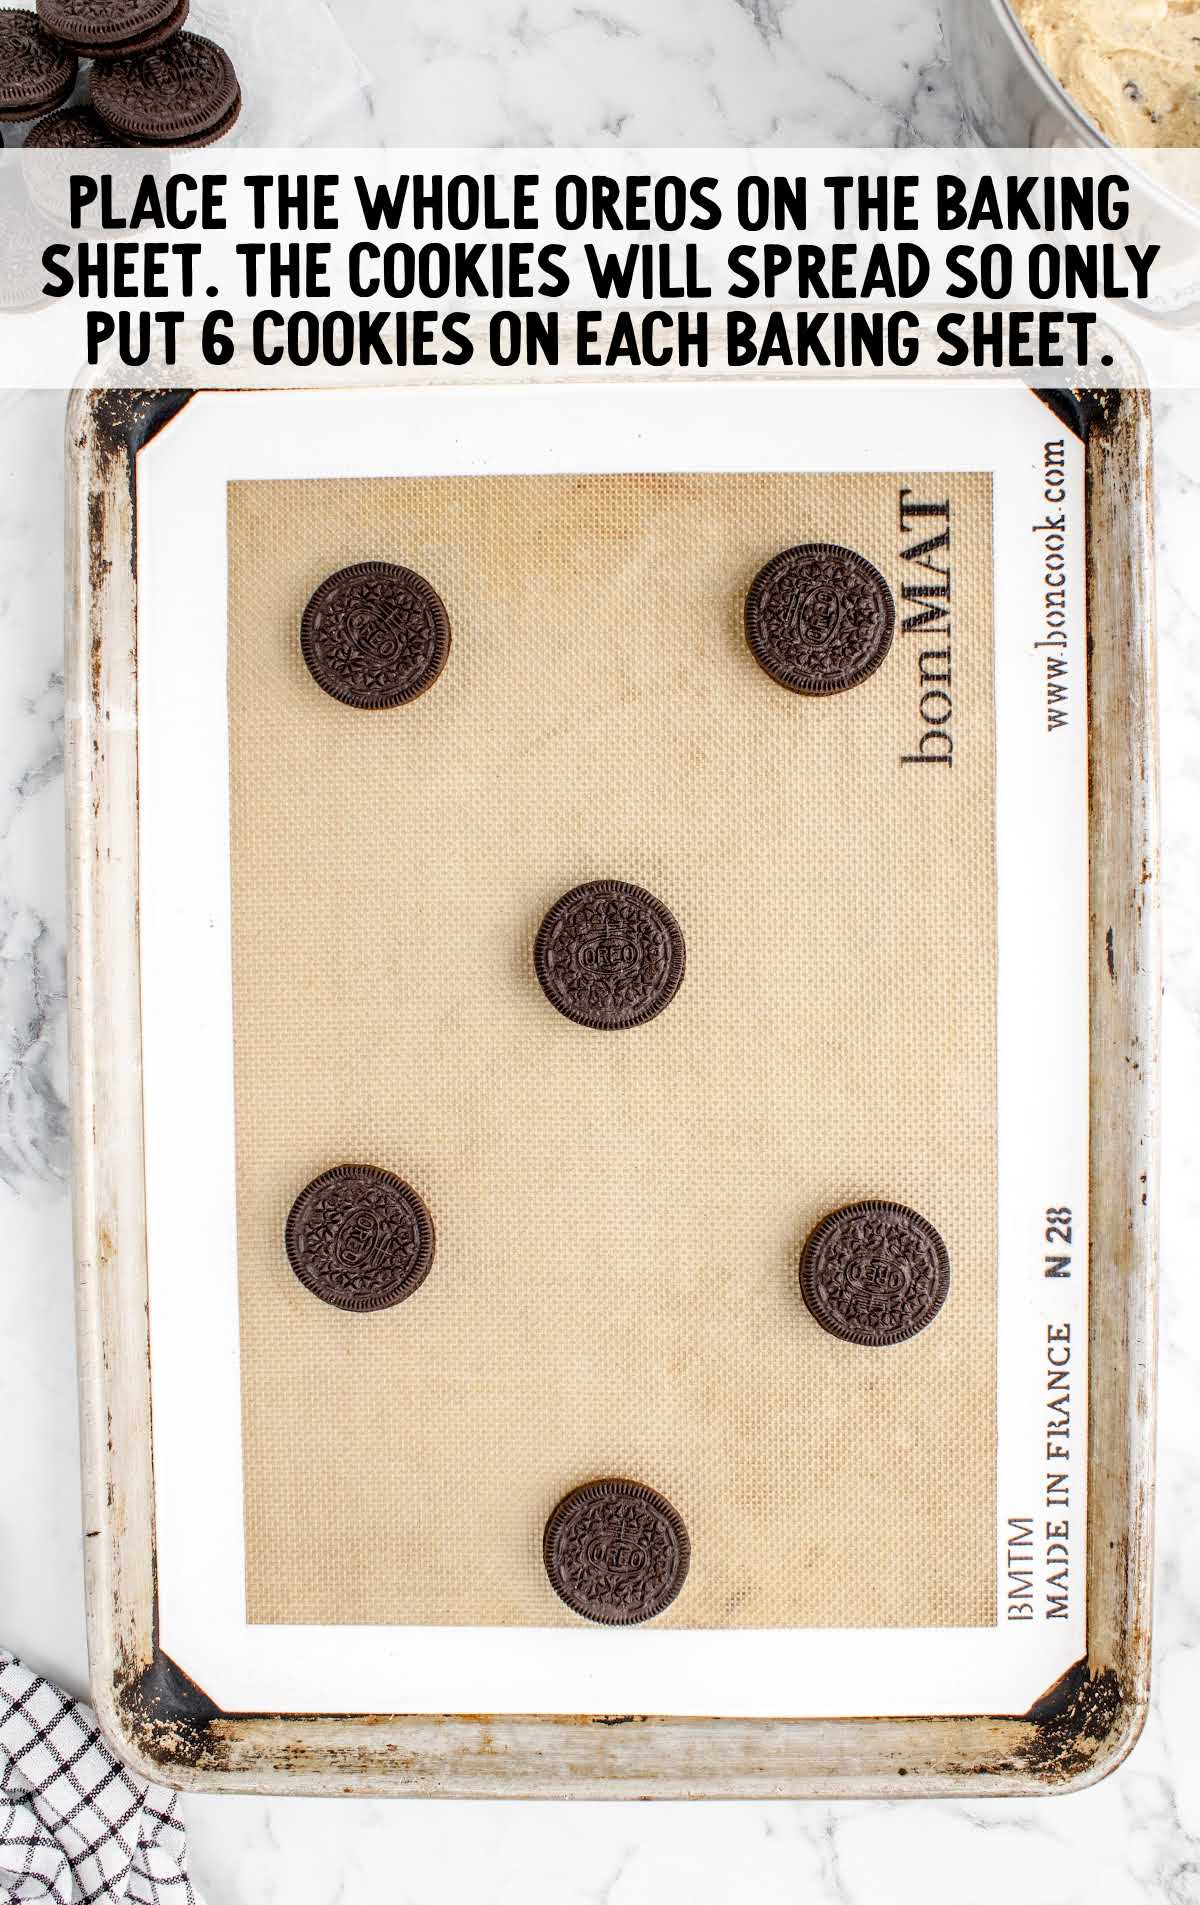 oreos placed in a baking sheet spread out